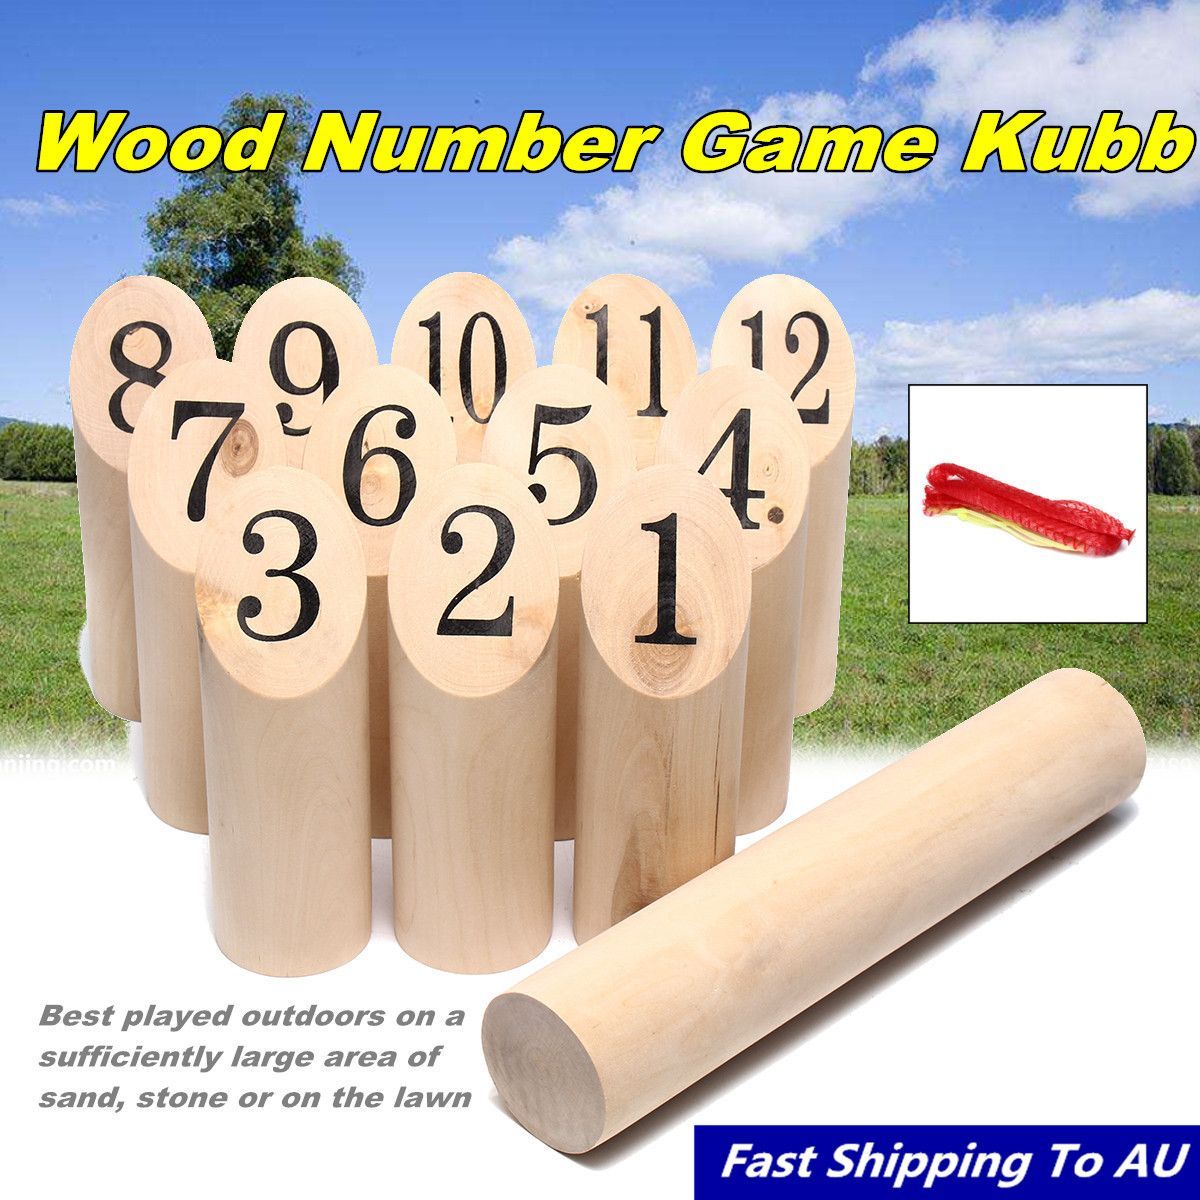 Number-KUBB-Wooden-Family-Outdoor-Garden-Lawn-Game-Set-Board-Game-Toy-1598917